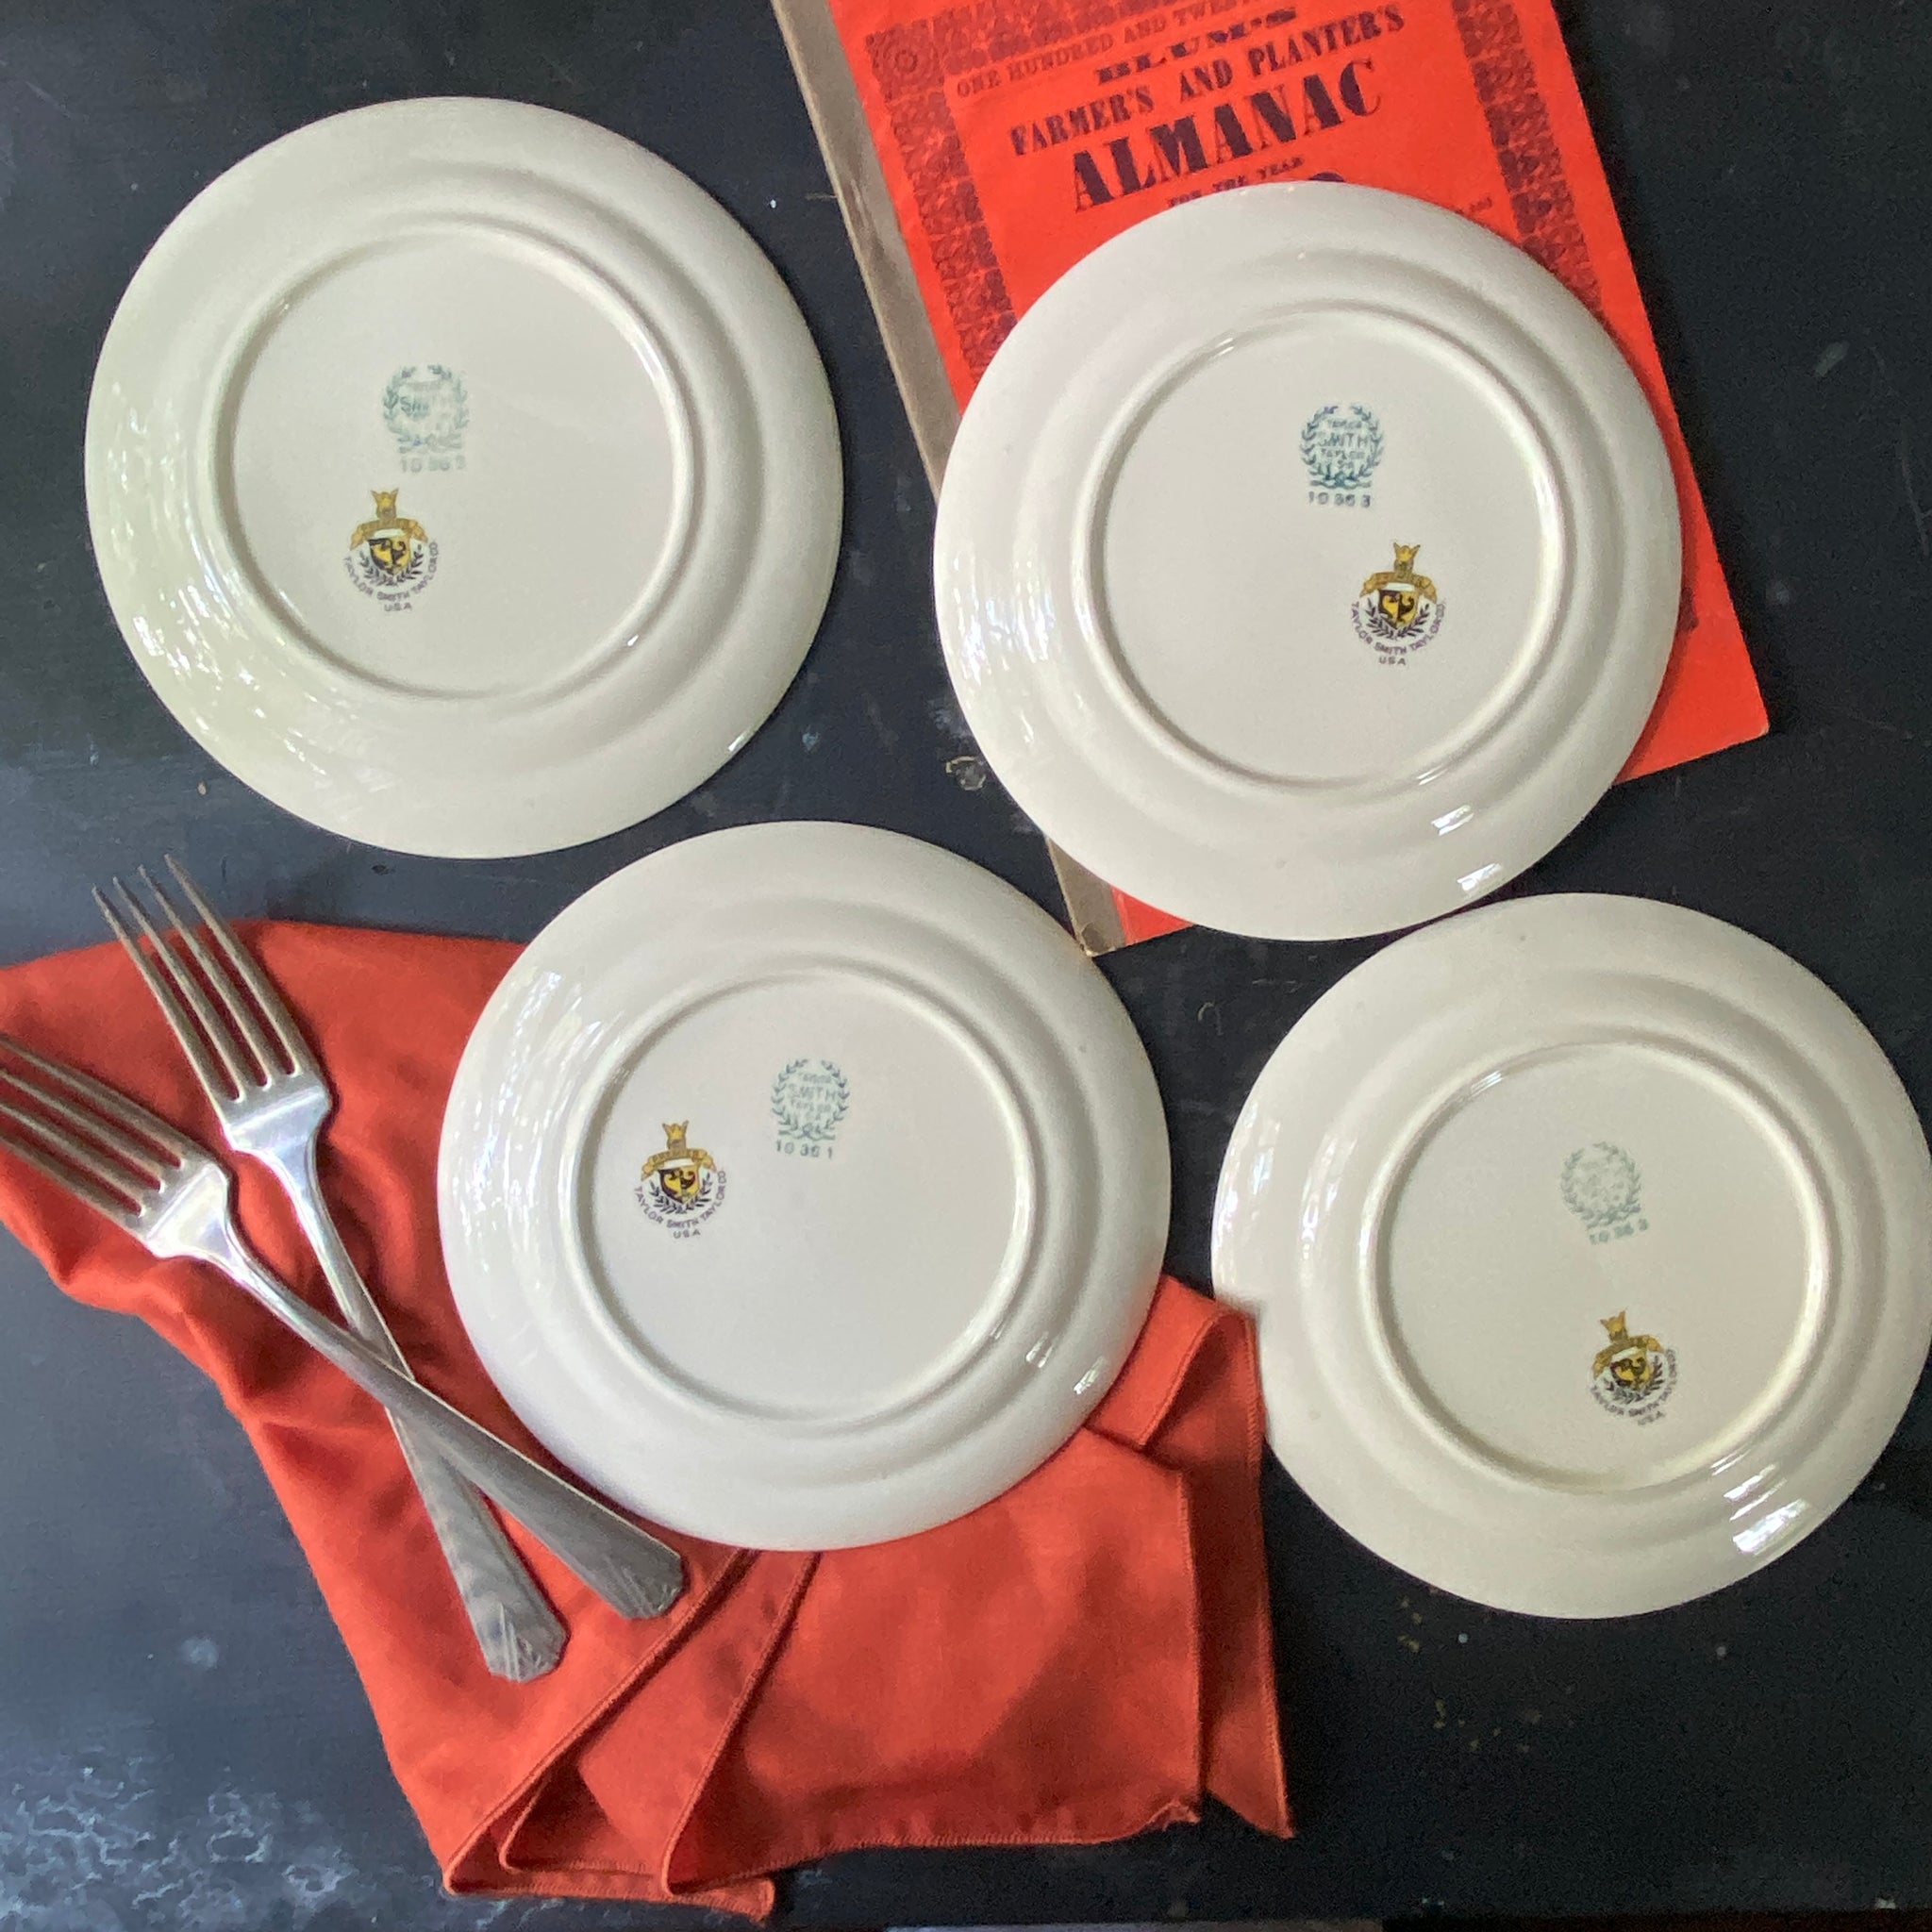 Vintage 1930s Red Wheat Bread and Butter Plates Designed by J. Palin Thorley